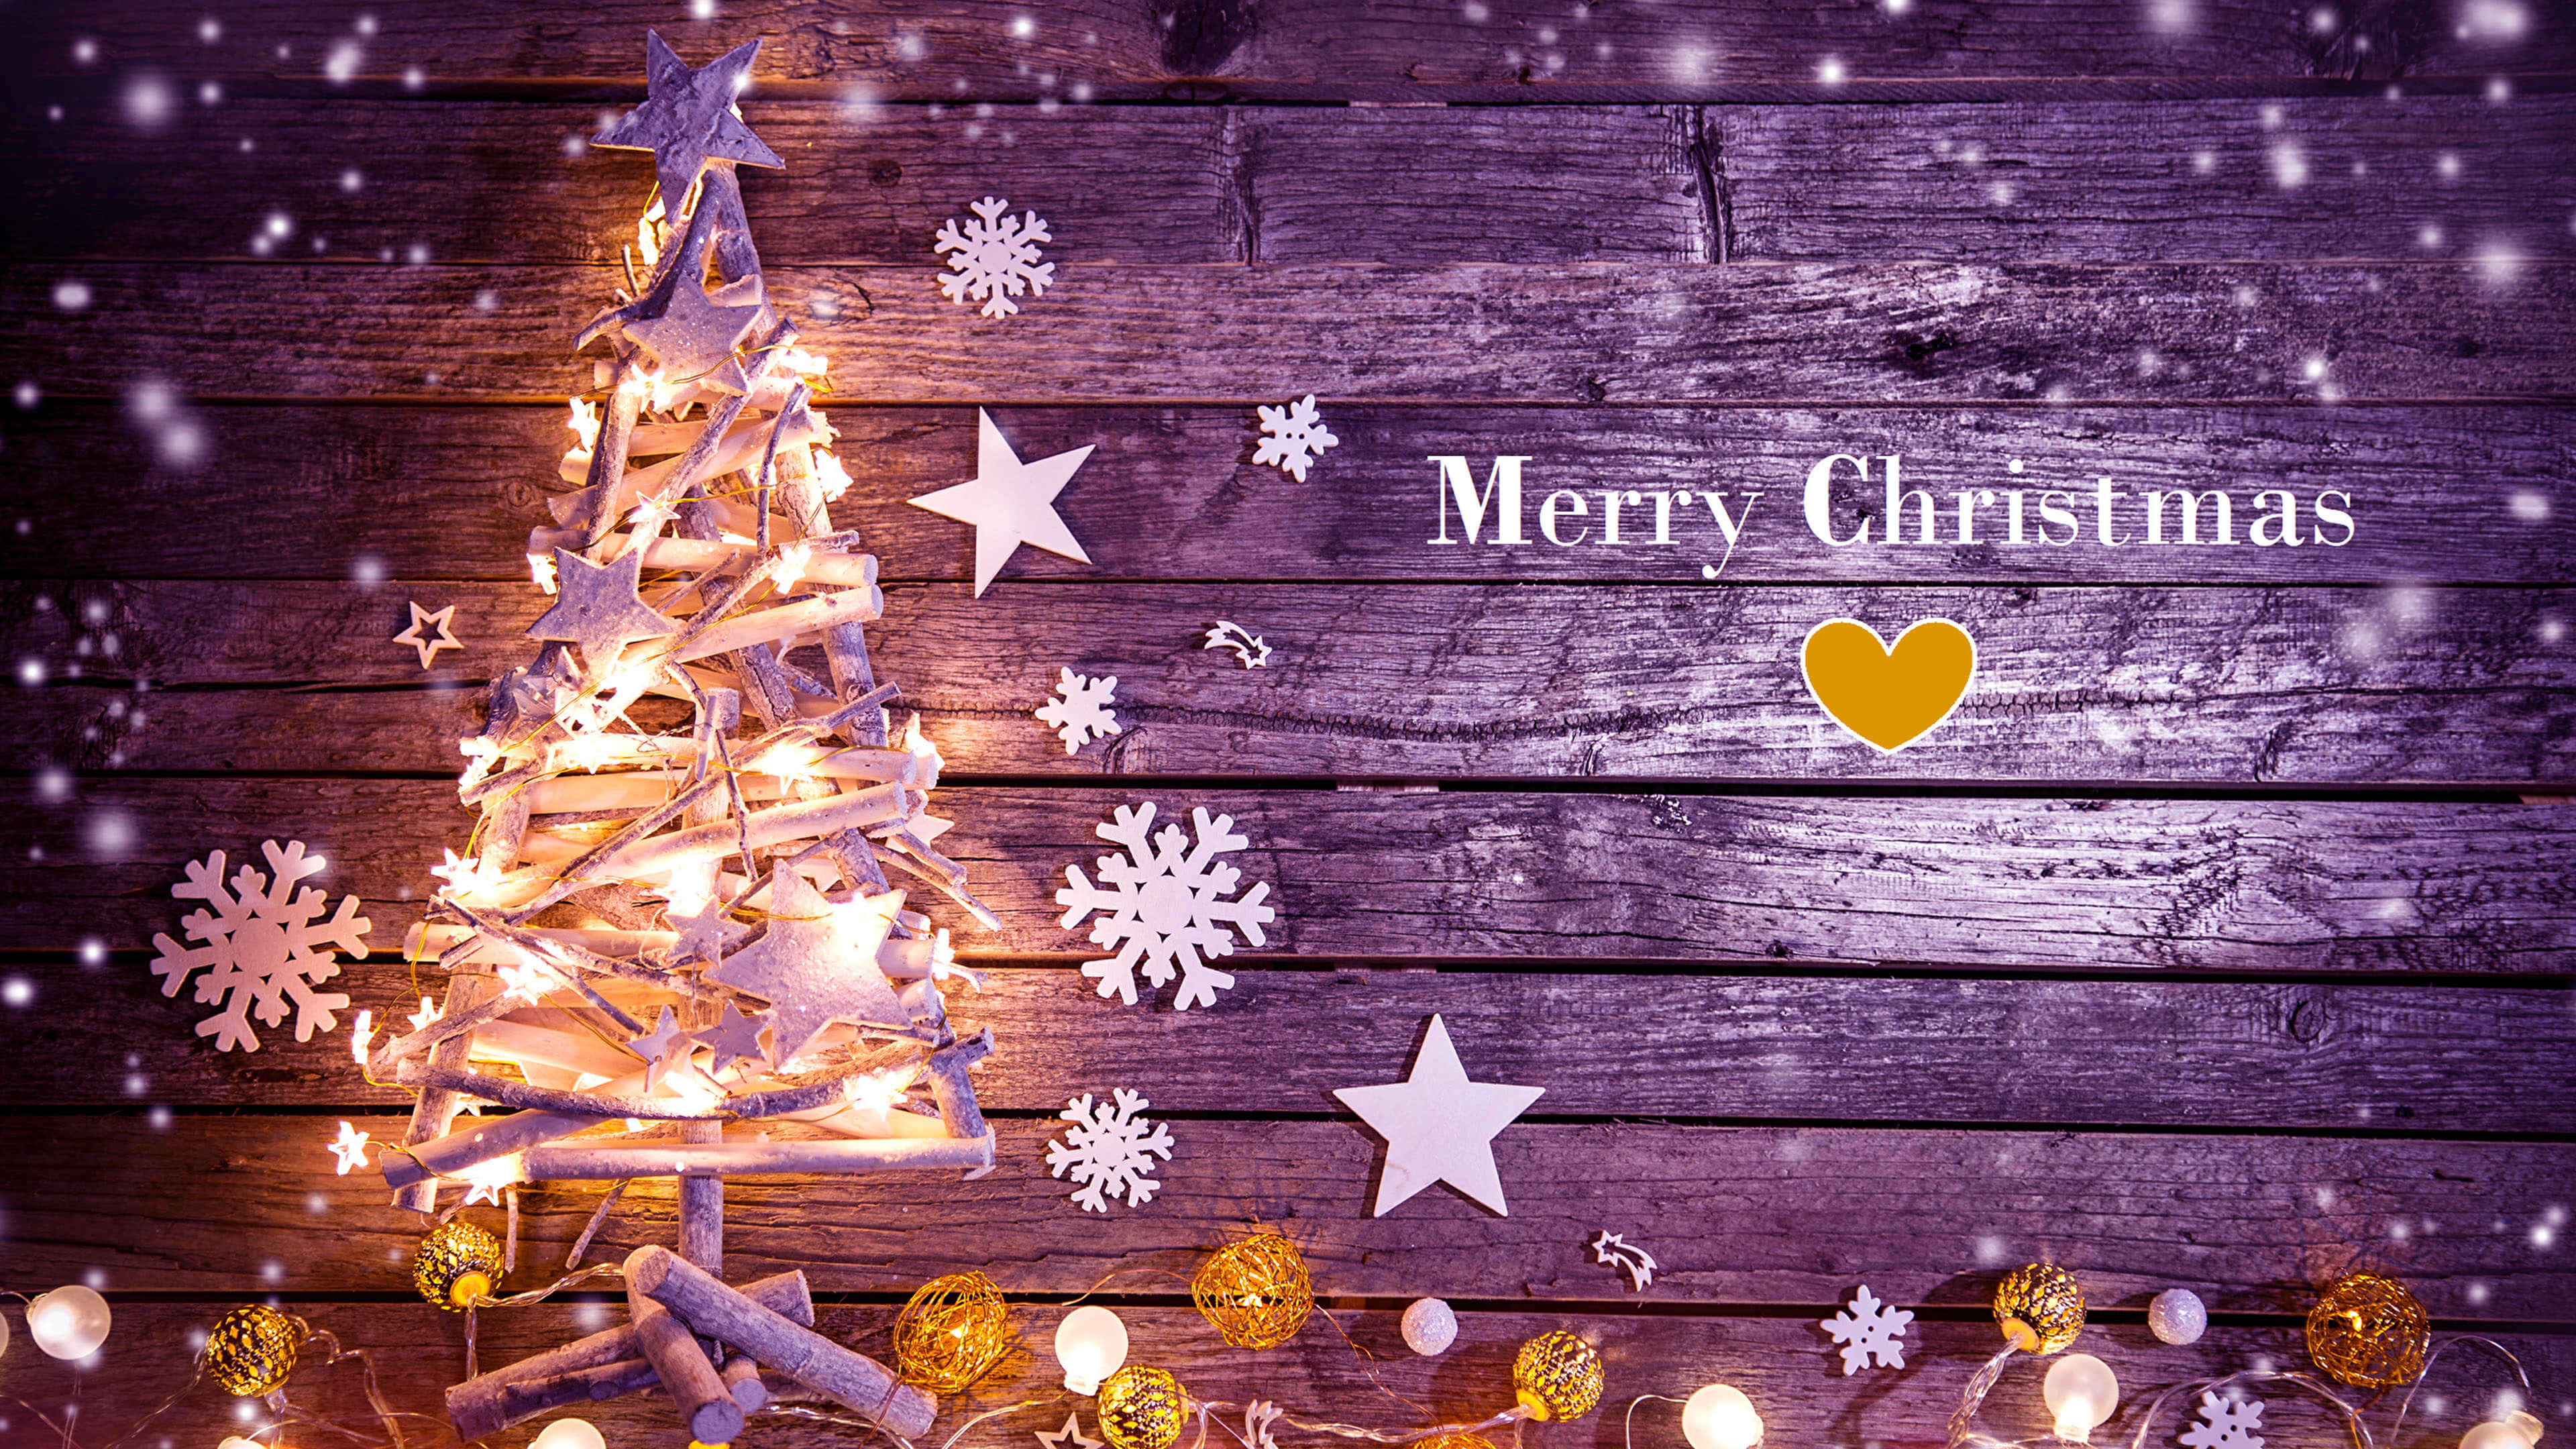 Merry Christmas Wallpapers Wallpaper Cave 7365